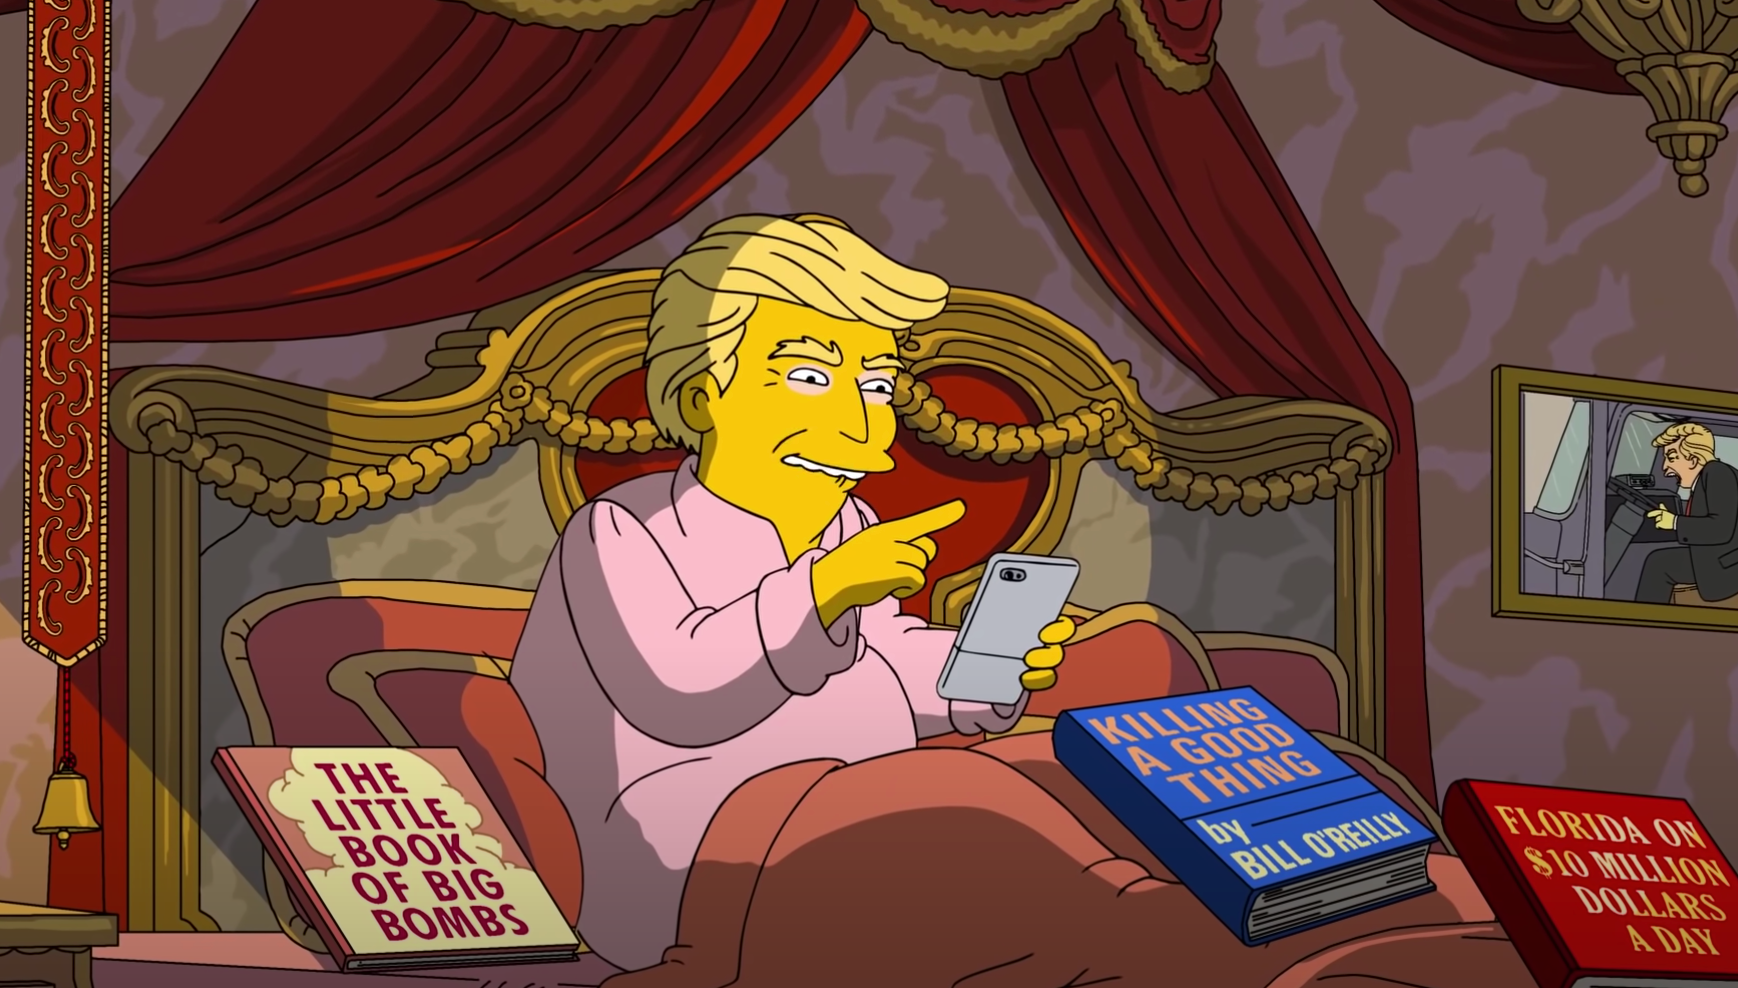 The Simpsons list 50 reasons not to reelect Donald Trump in new 'Treehouse  of Horror' episode | The Independent